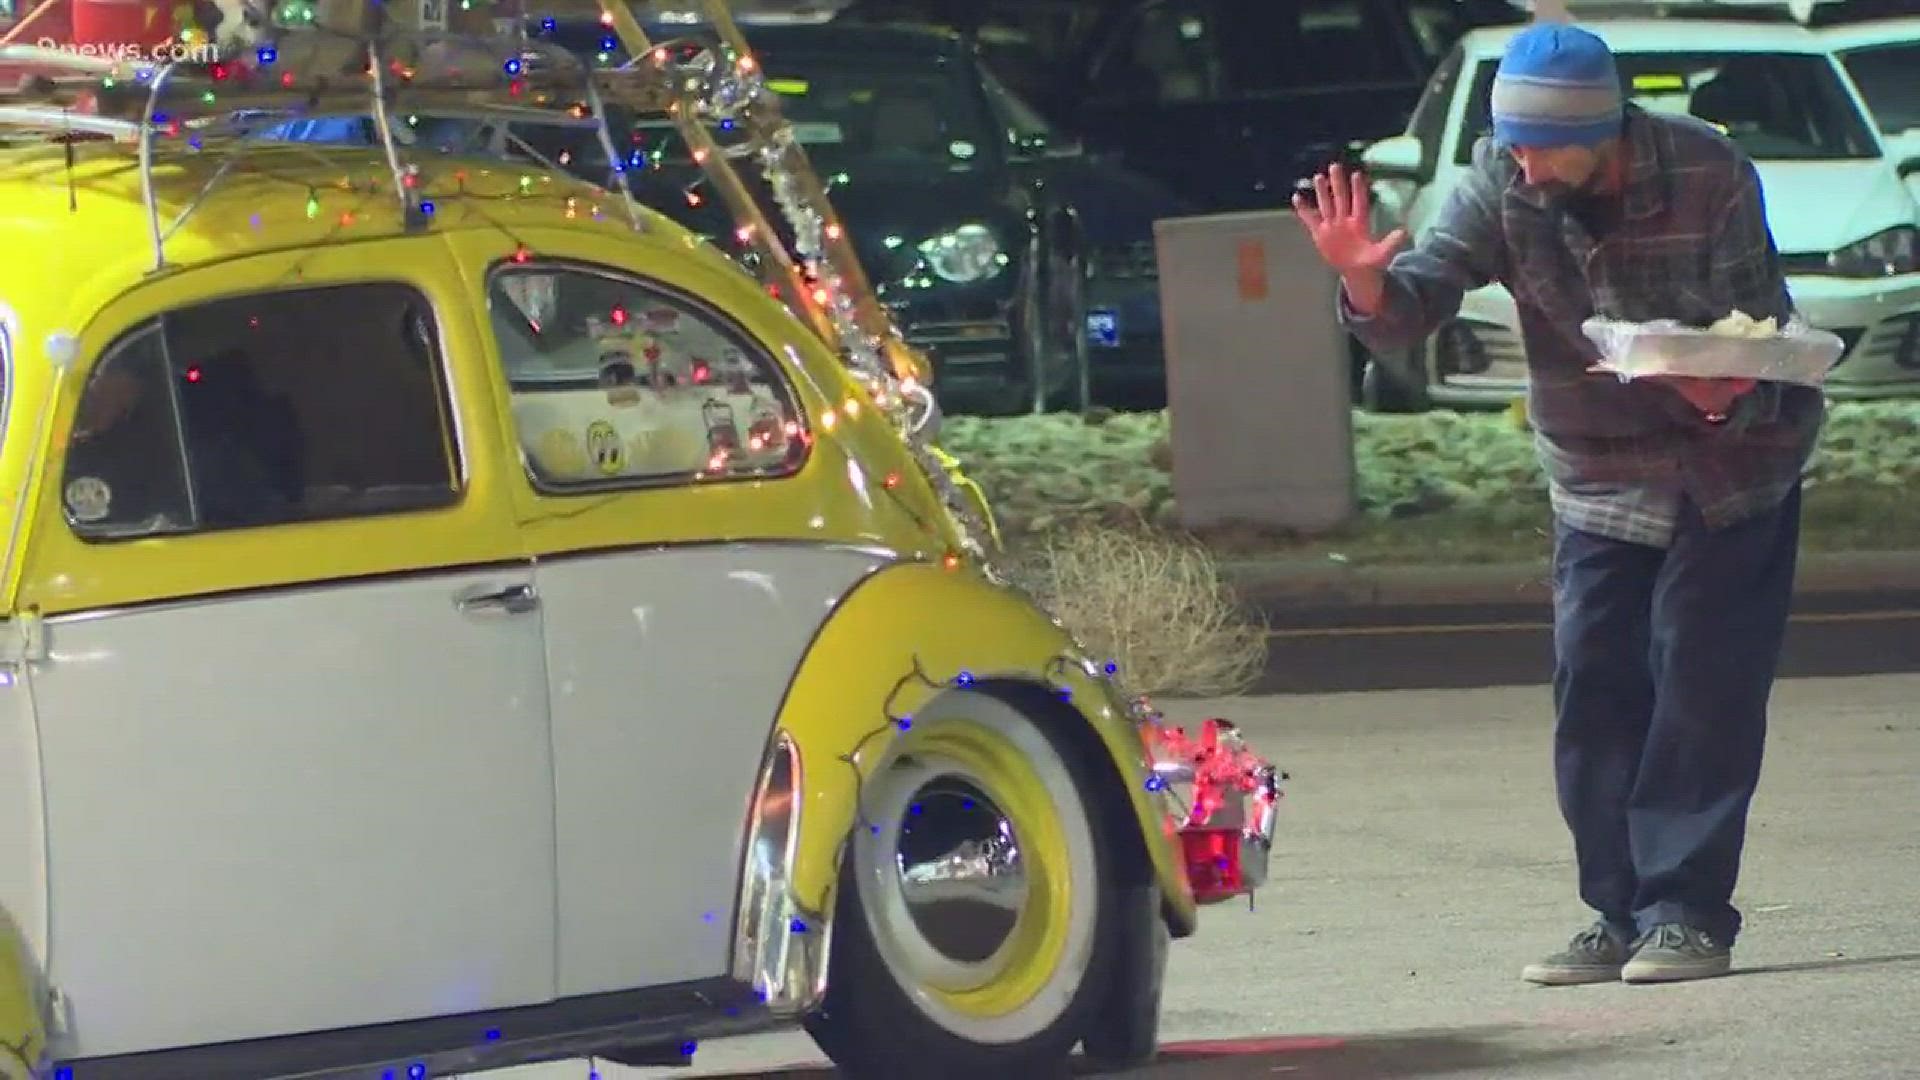 Drivers decorate cars to bring gifts and Christmas joy to kids "who have nothing."